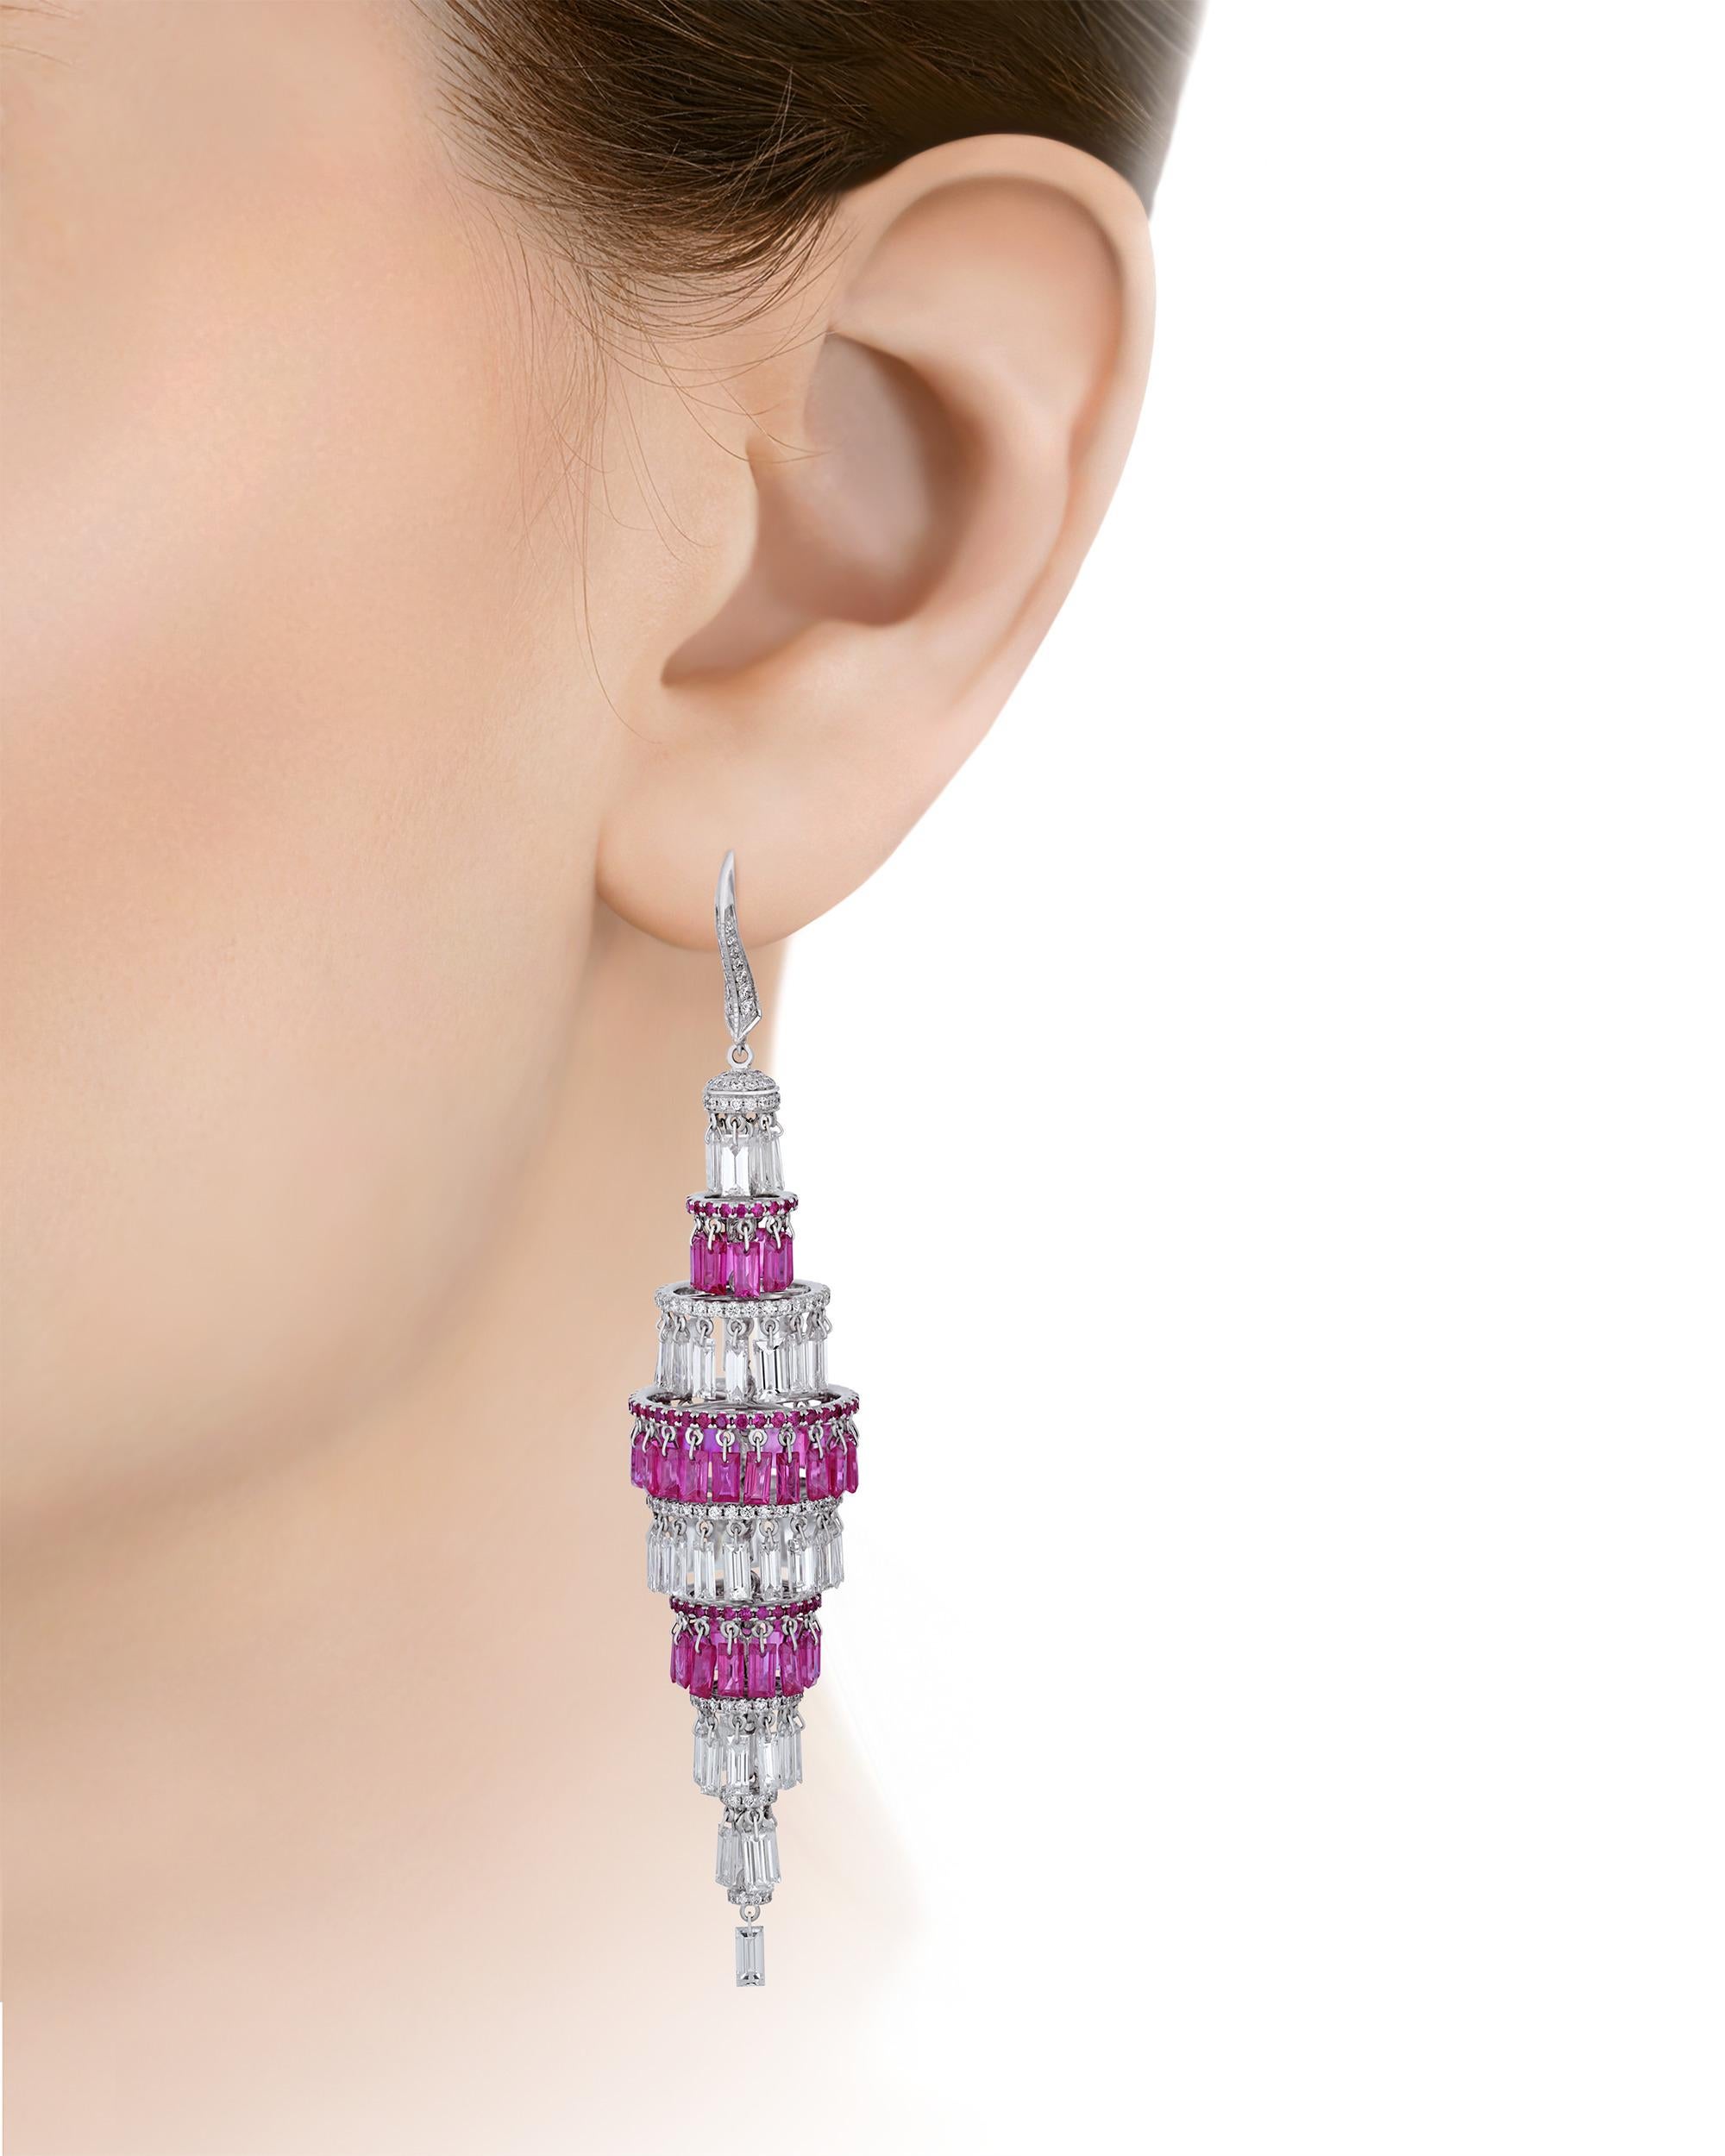 Precisely cut baguette diamonds totaling 14.51 carats and 13.84 carats of crimson rubies cascade in these timeless chandelier earrings. Architectural yet elegant, the jewels are set in lustrous 18K white gold.

3 1/2“ length
